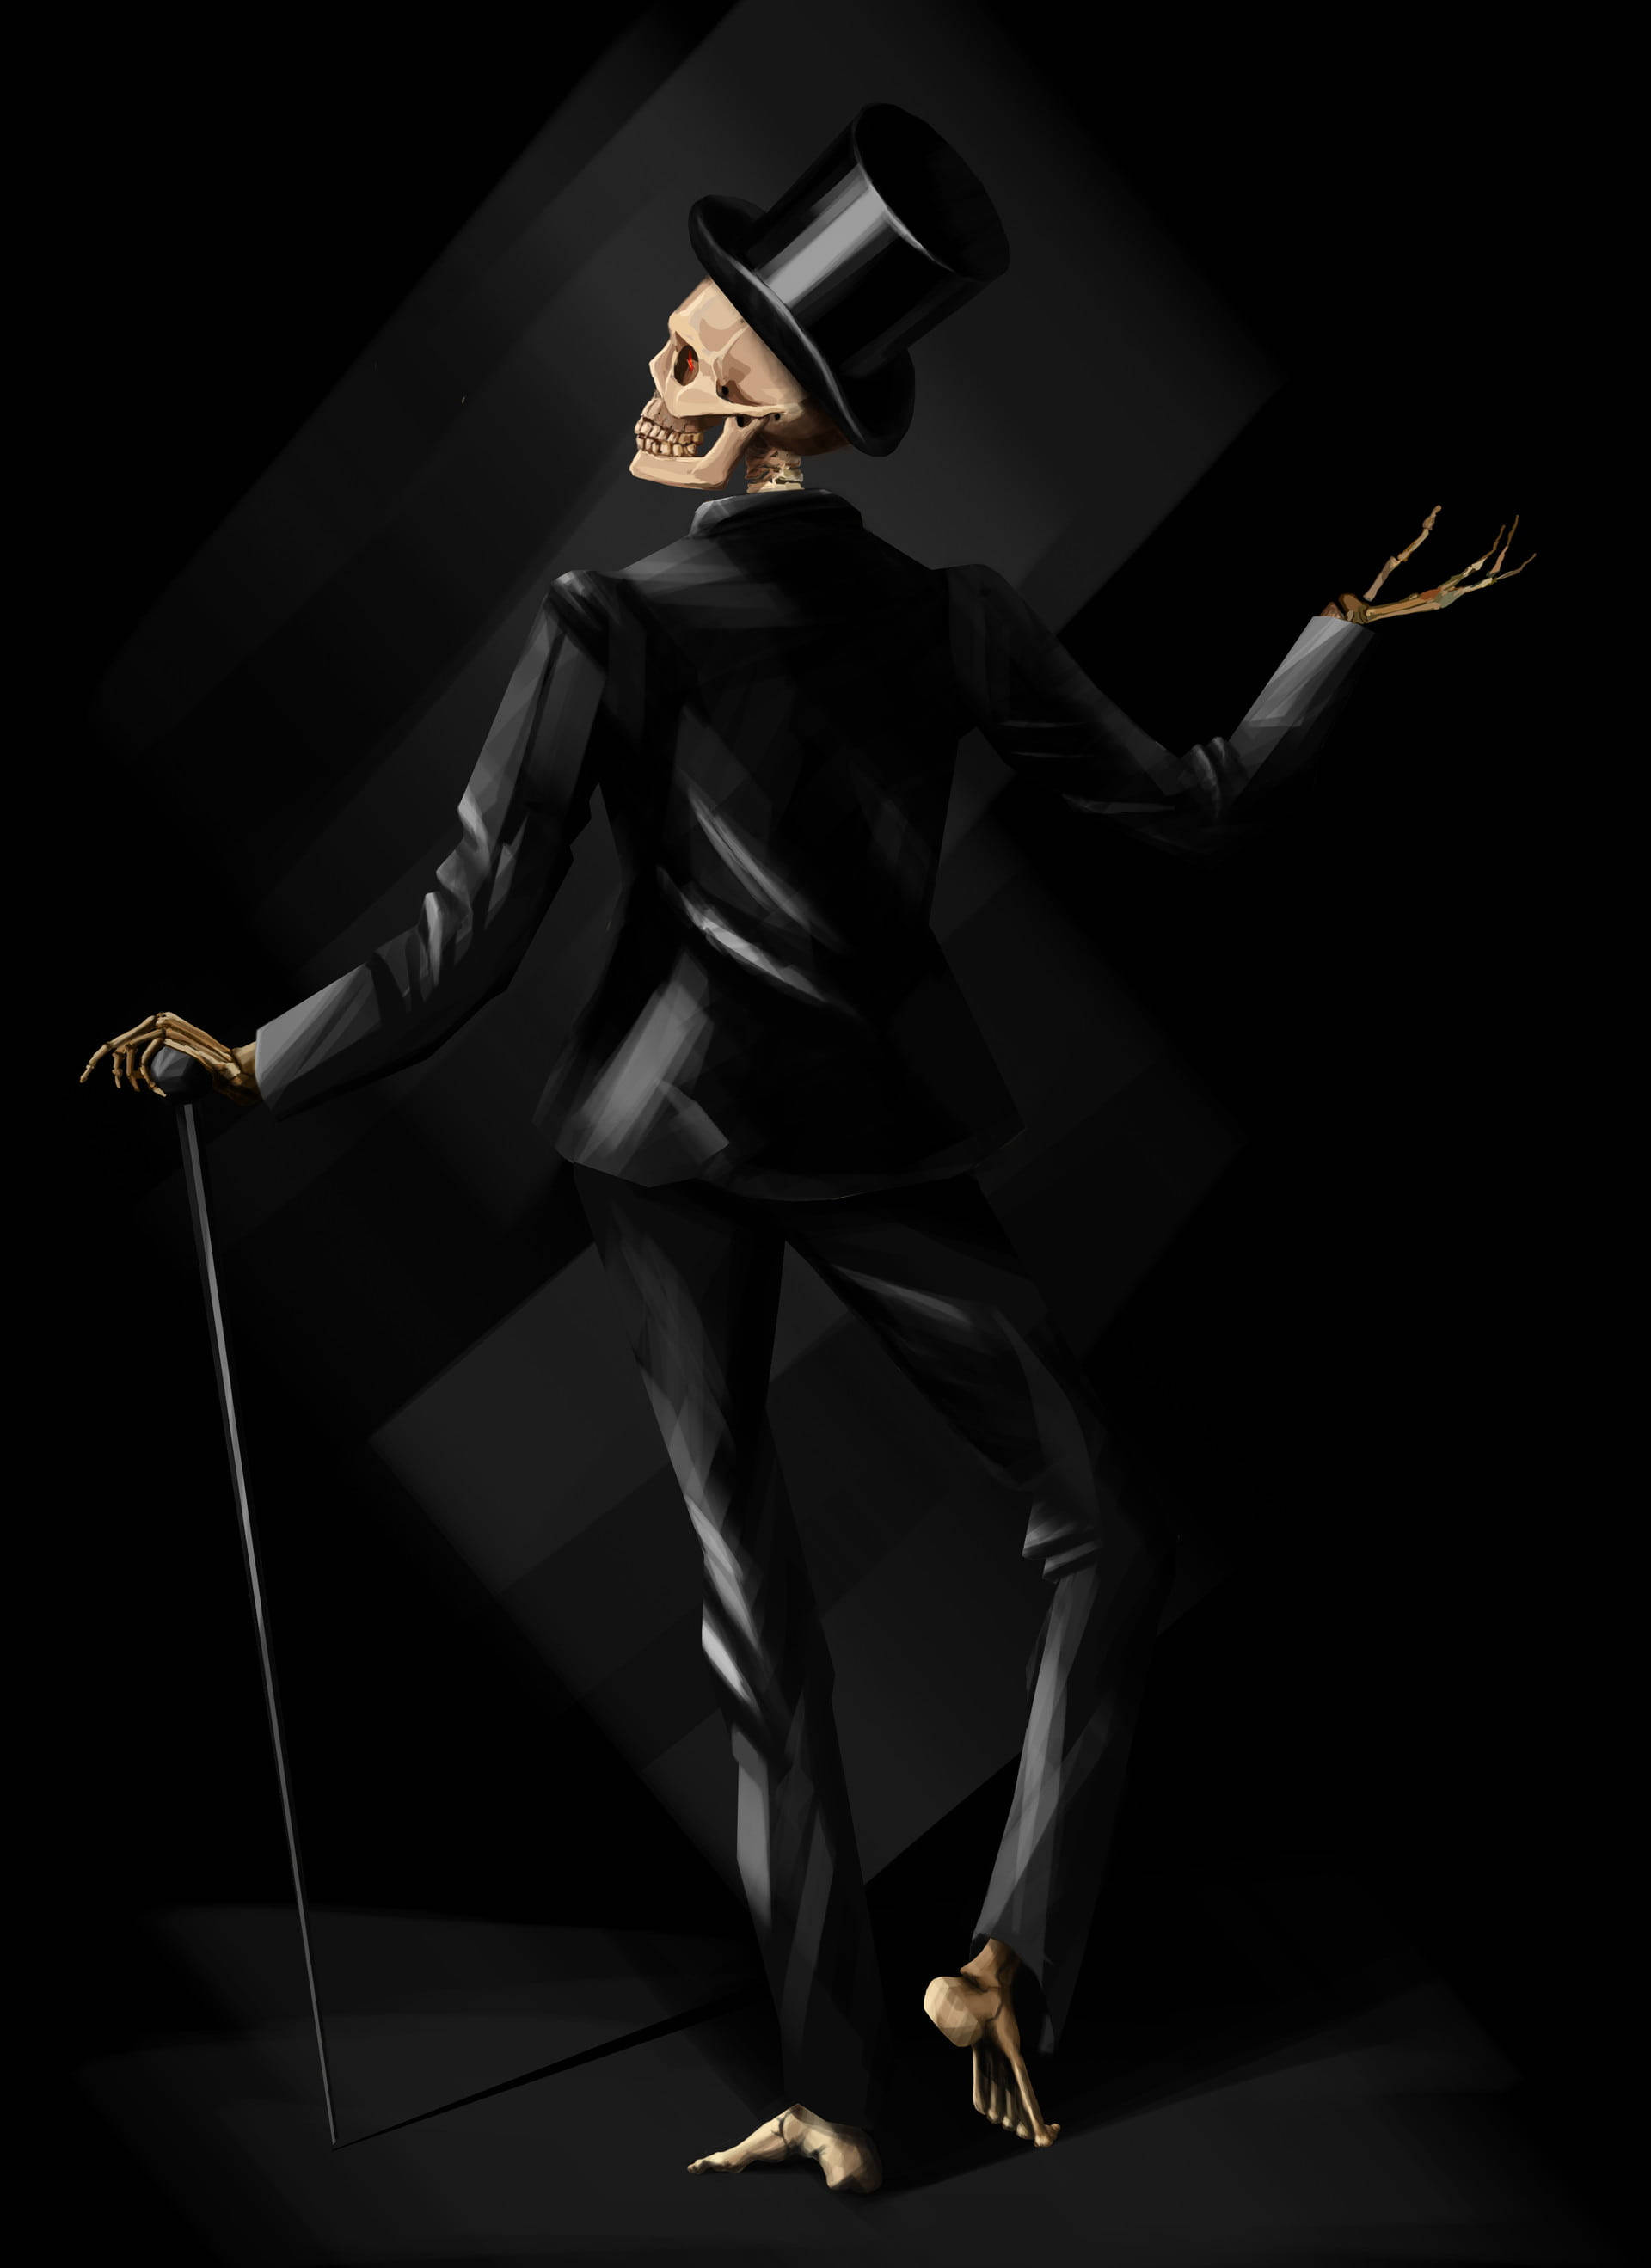 Dark Aesthetic: A Black Magician Suit On A Skeleton, Reflecting A Mysterious And Intriguing Vibe. Background